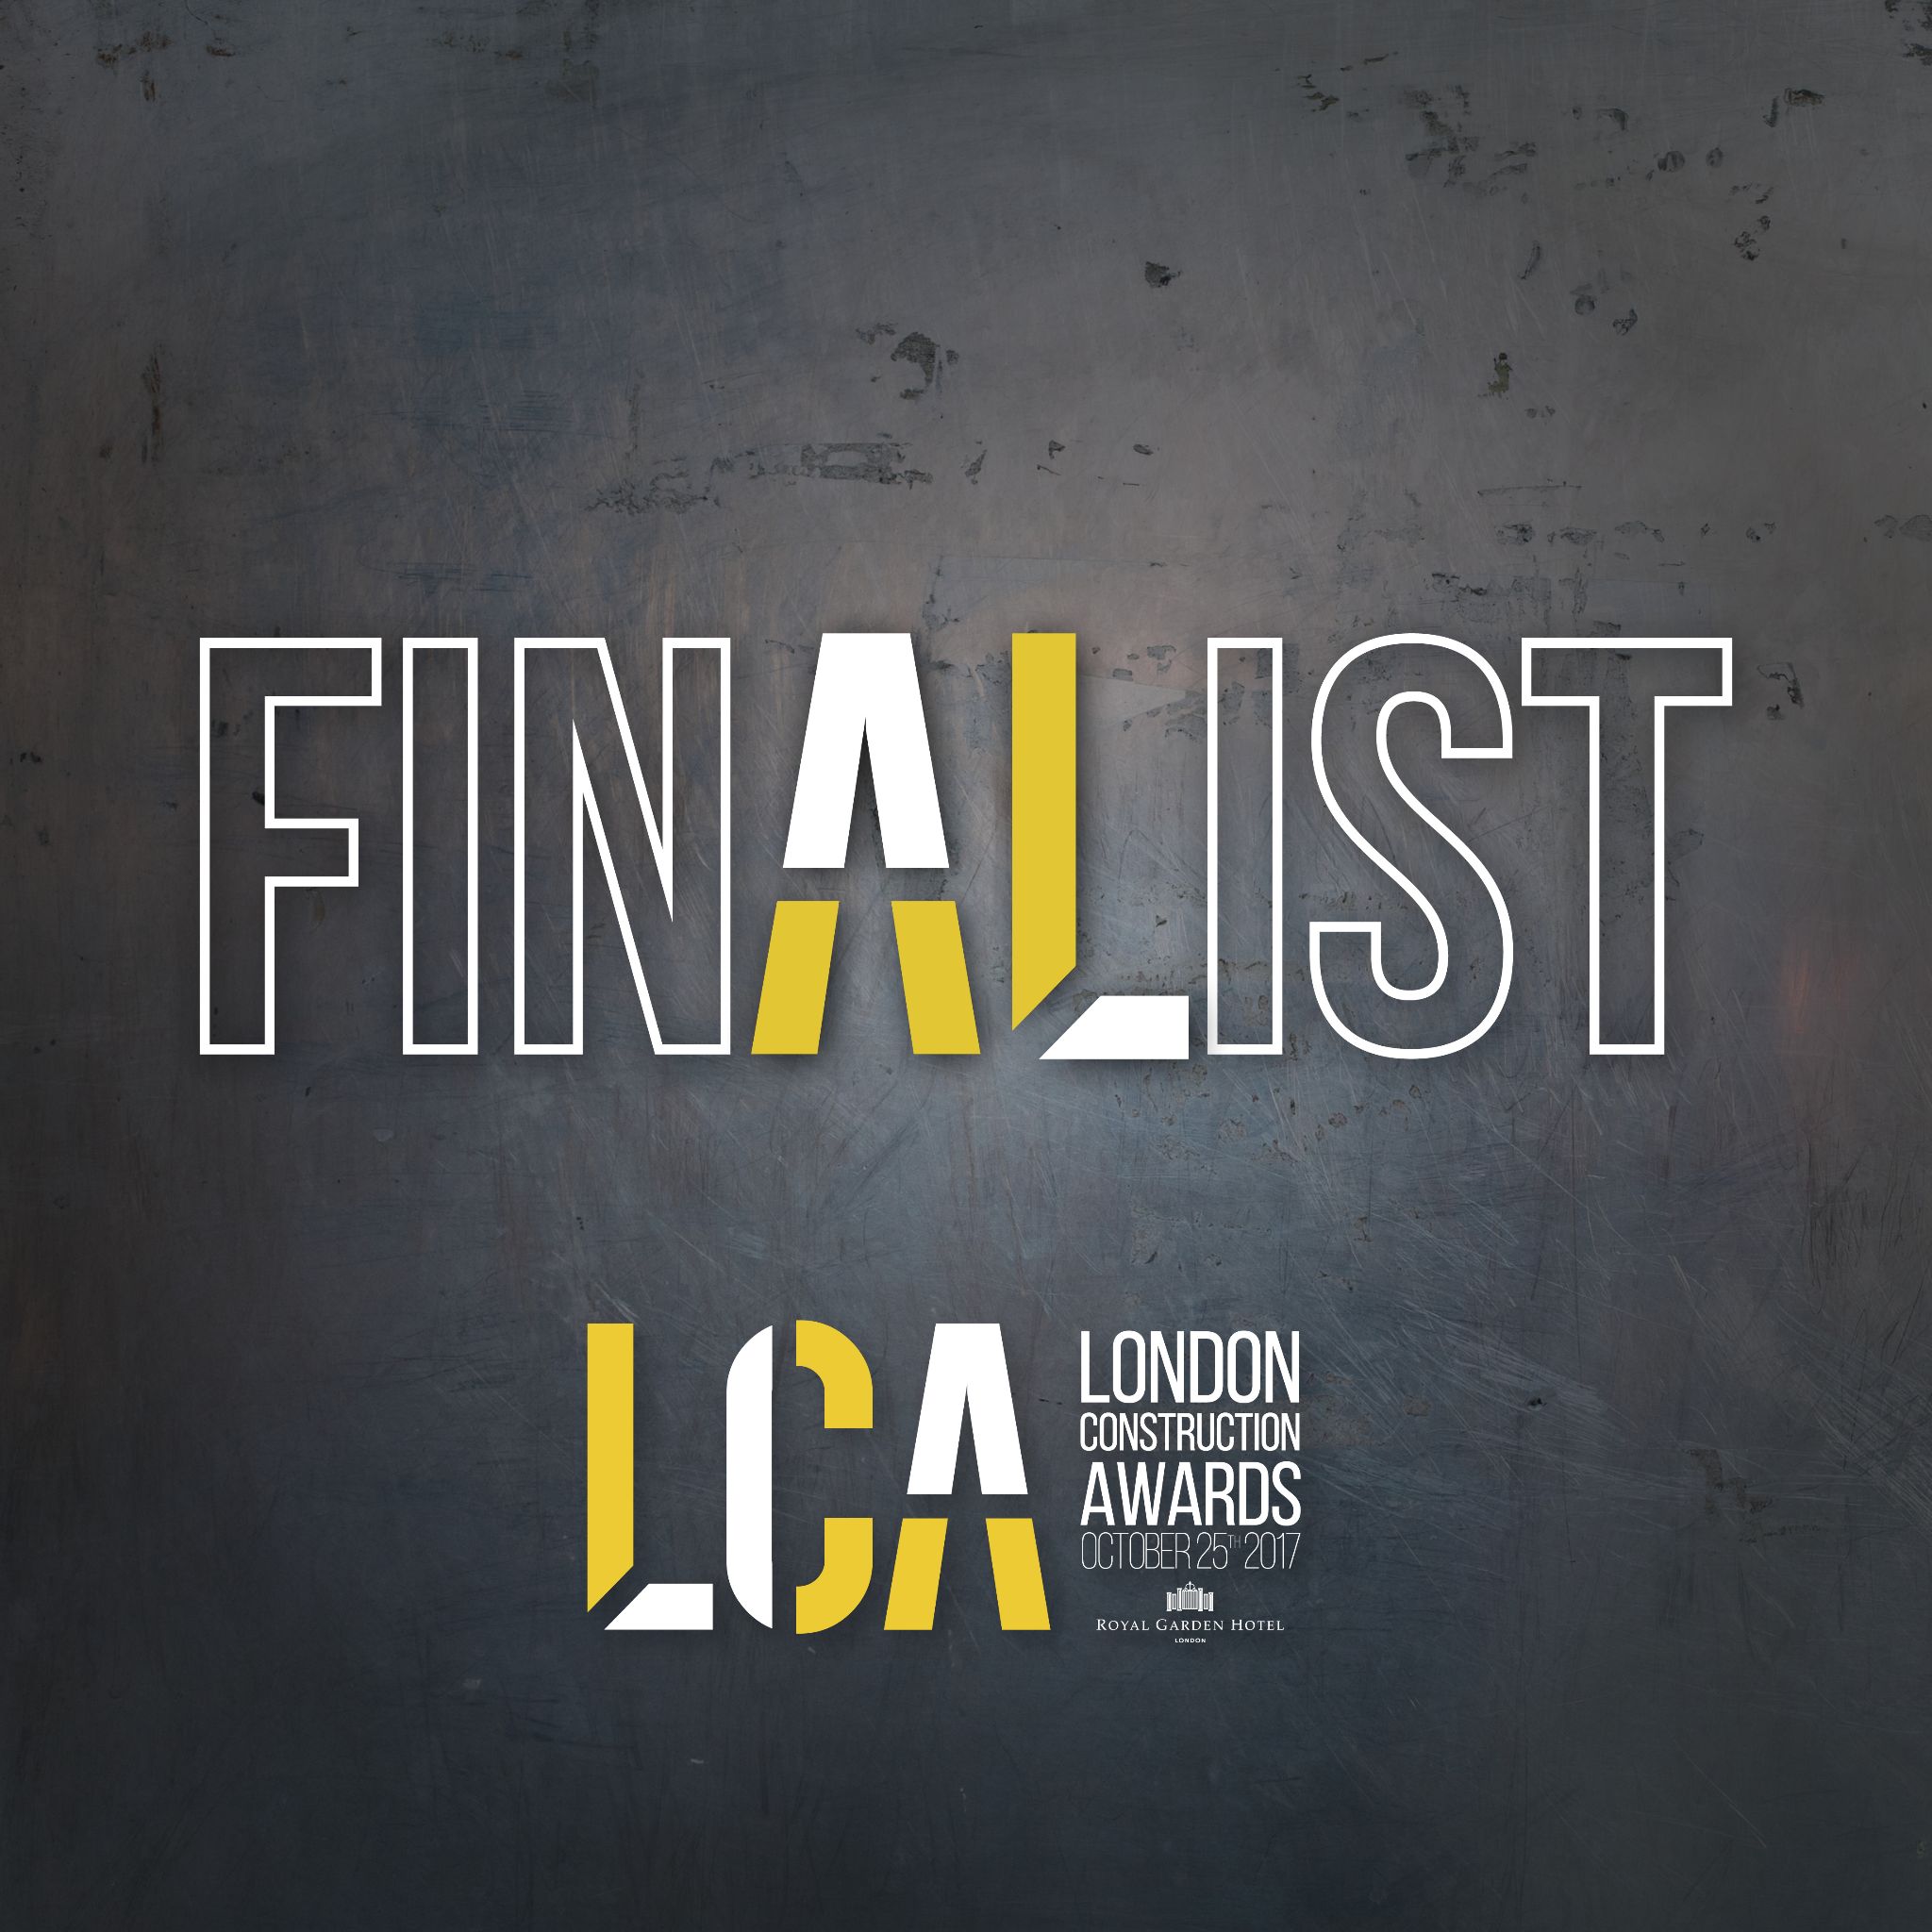 Vent-Axia is a finalist at London Construction Awards